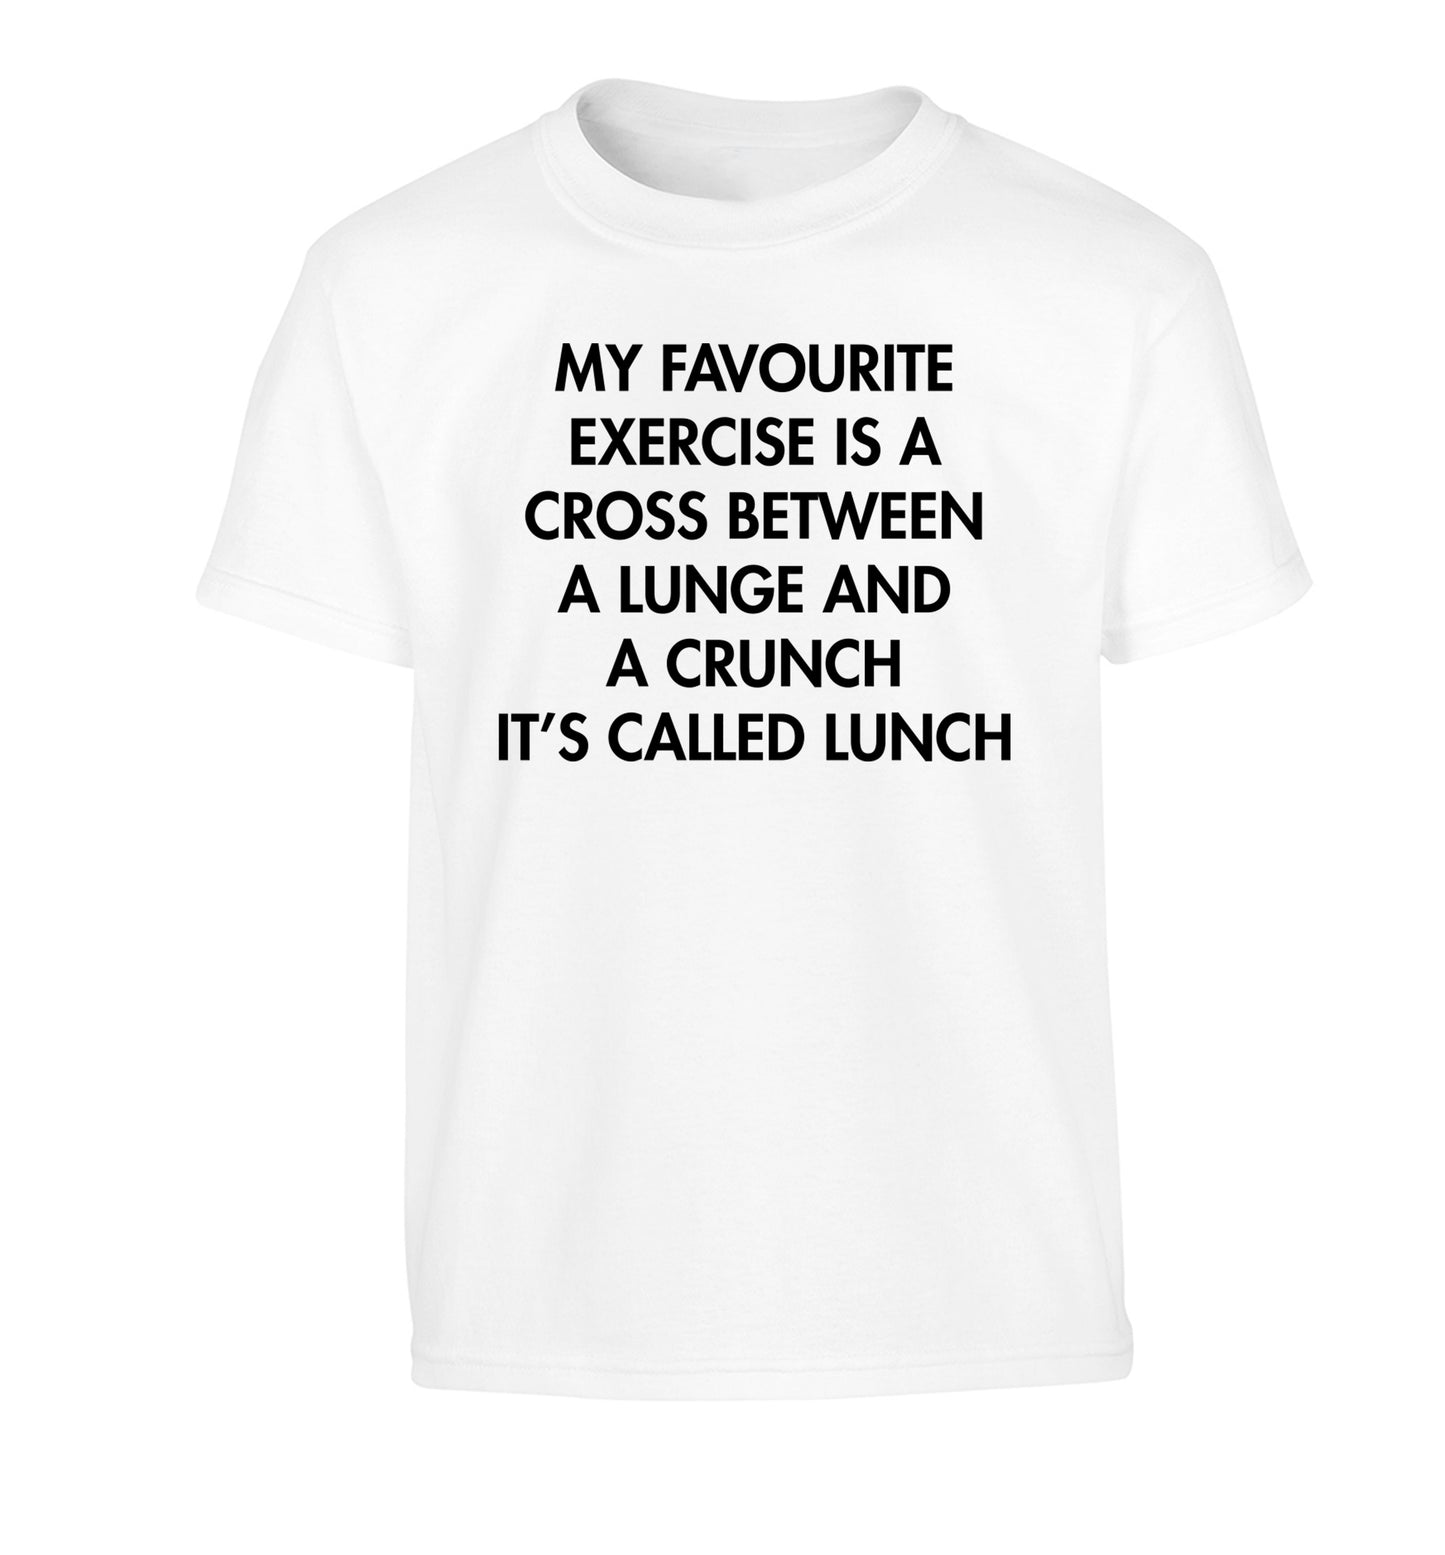 My favourite exercise is a cross between a lung and a crunch it's called lunch Children's white Tshirt 12-14 Years